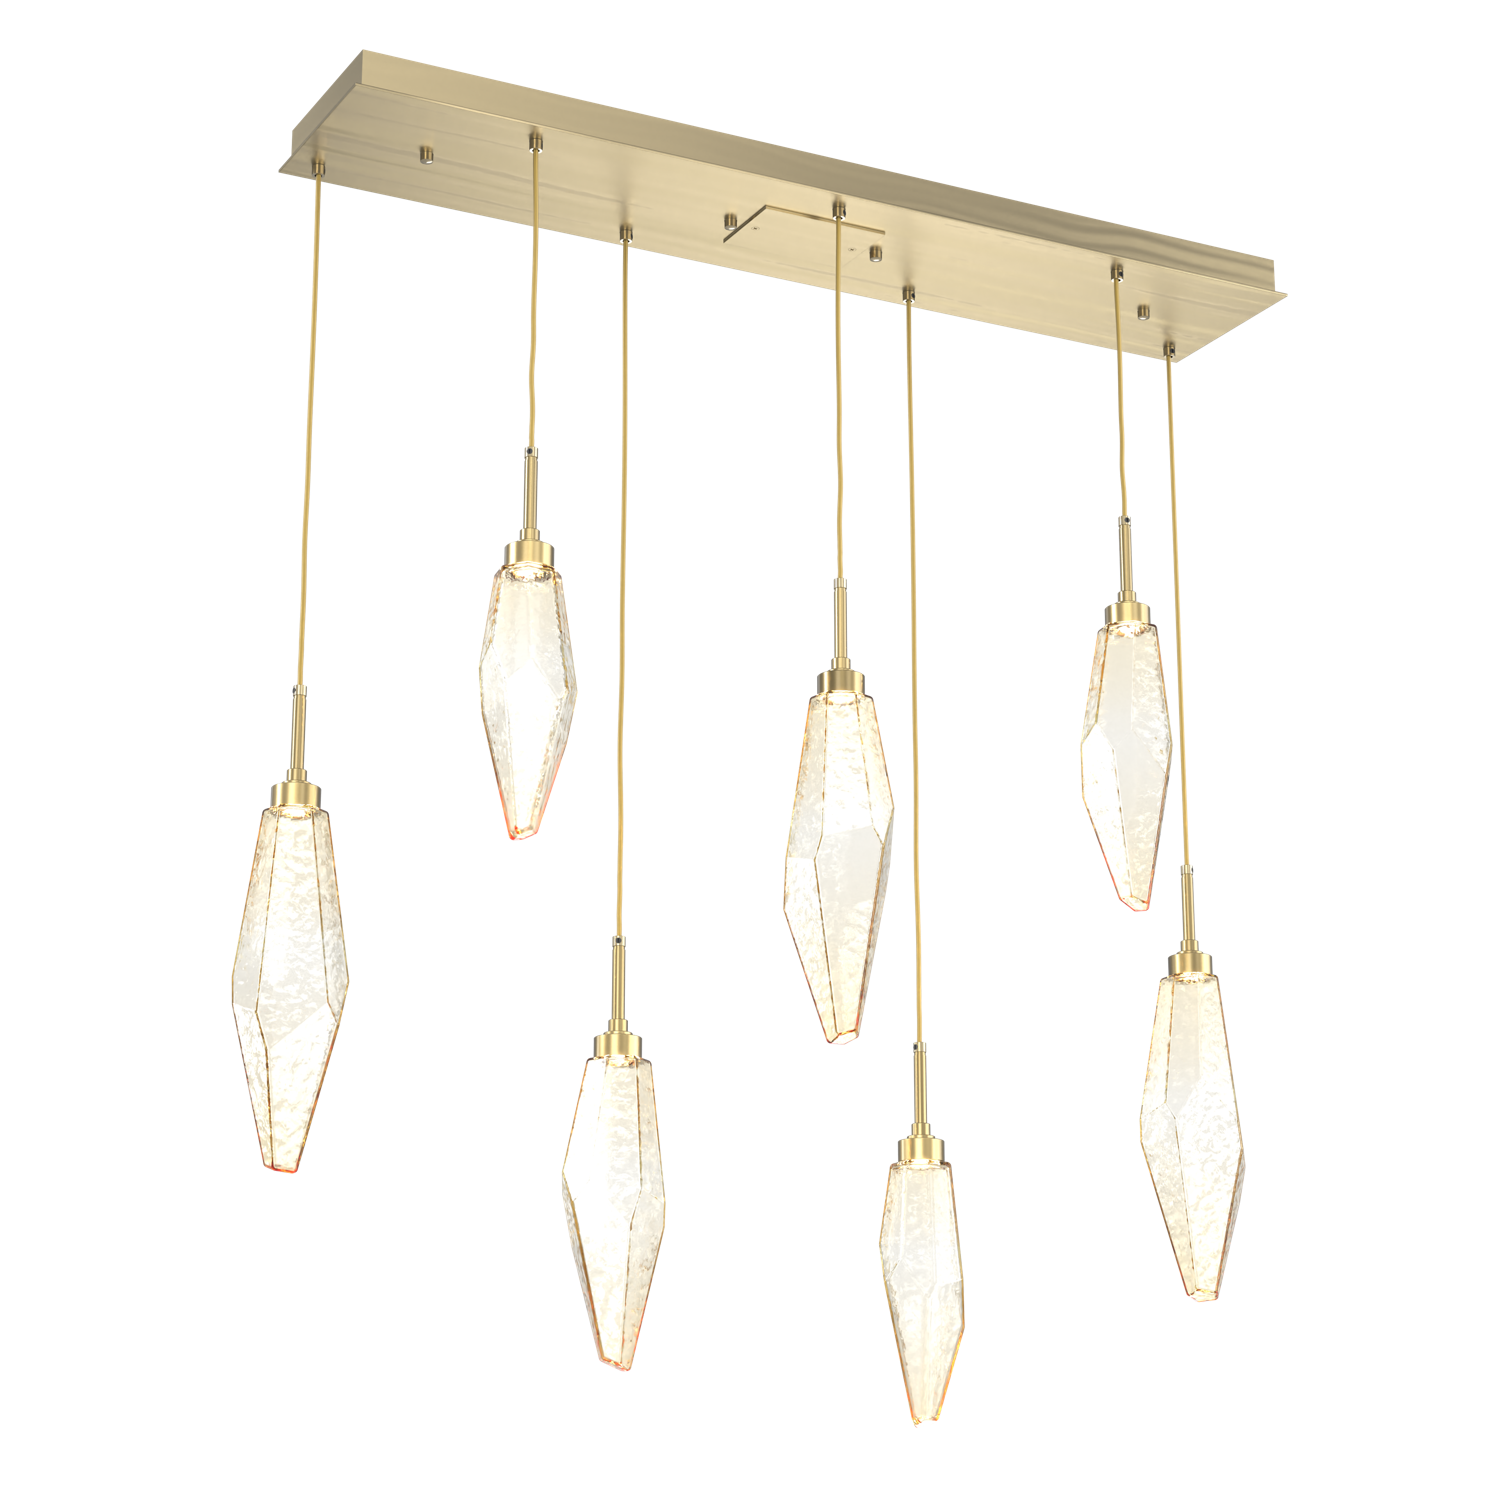 PLB0050-07-HB-CA-Hammerton-Studio-Rock-Crystal-7-light-linear-pendant-chandelier-with-heritage-brass-finish-and-chilled-amber-blown-glass-shades-and-LED-lamping